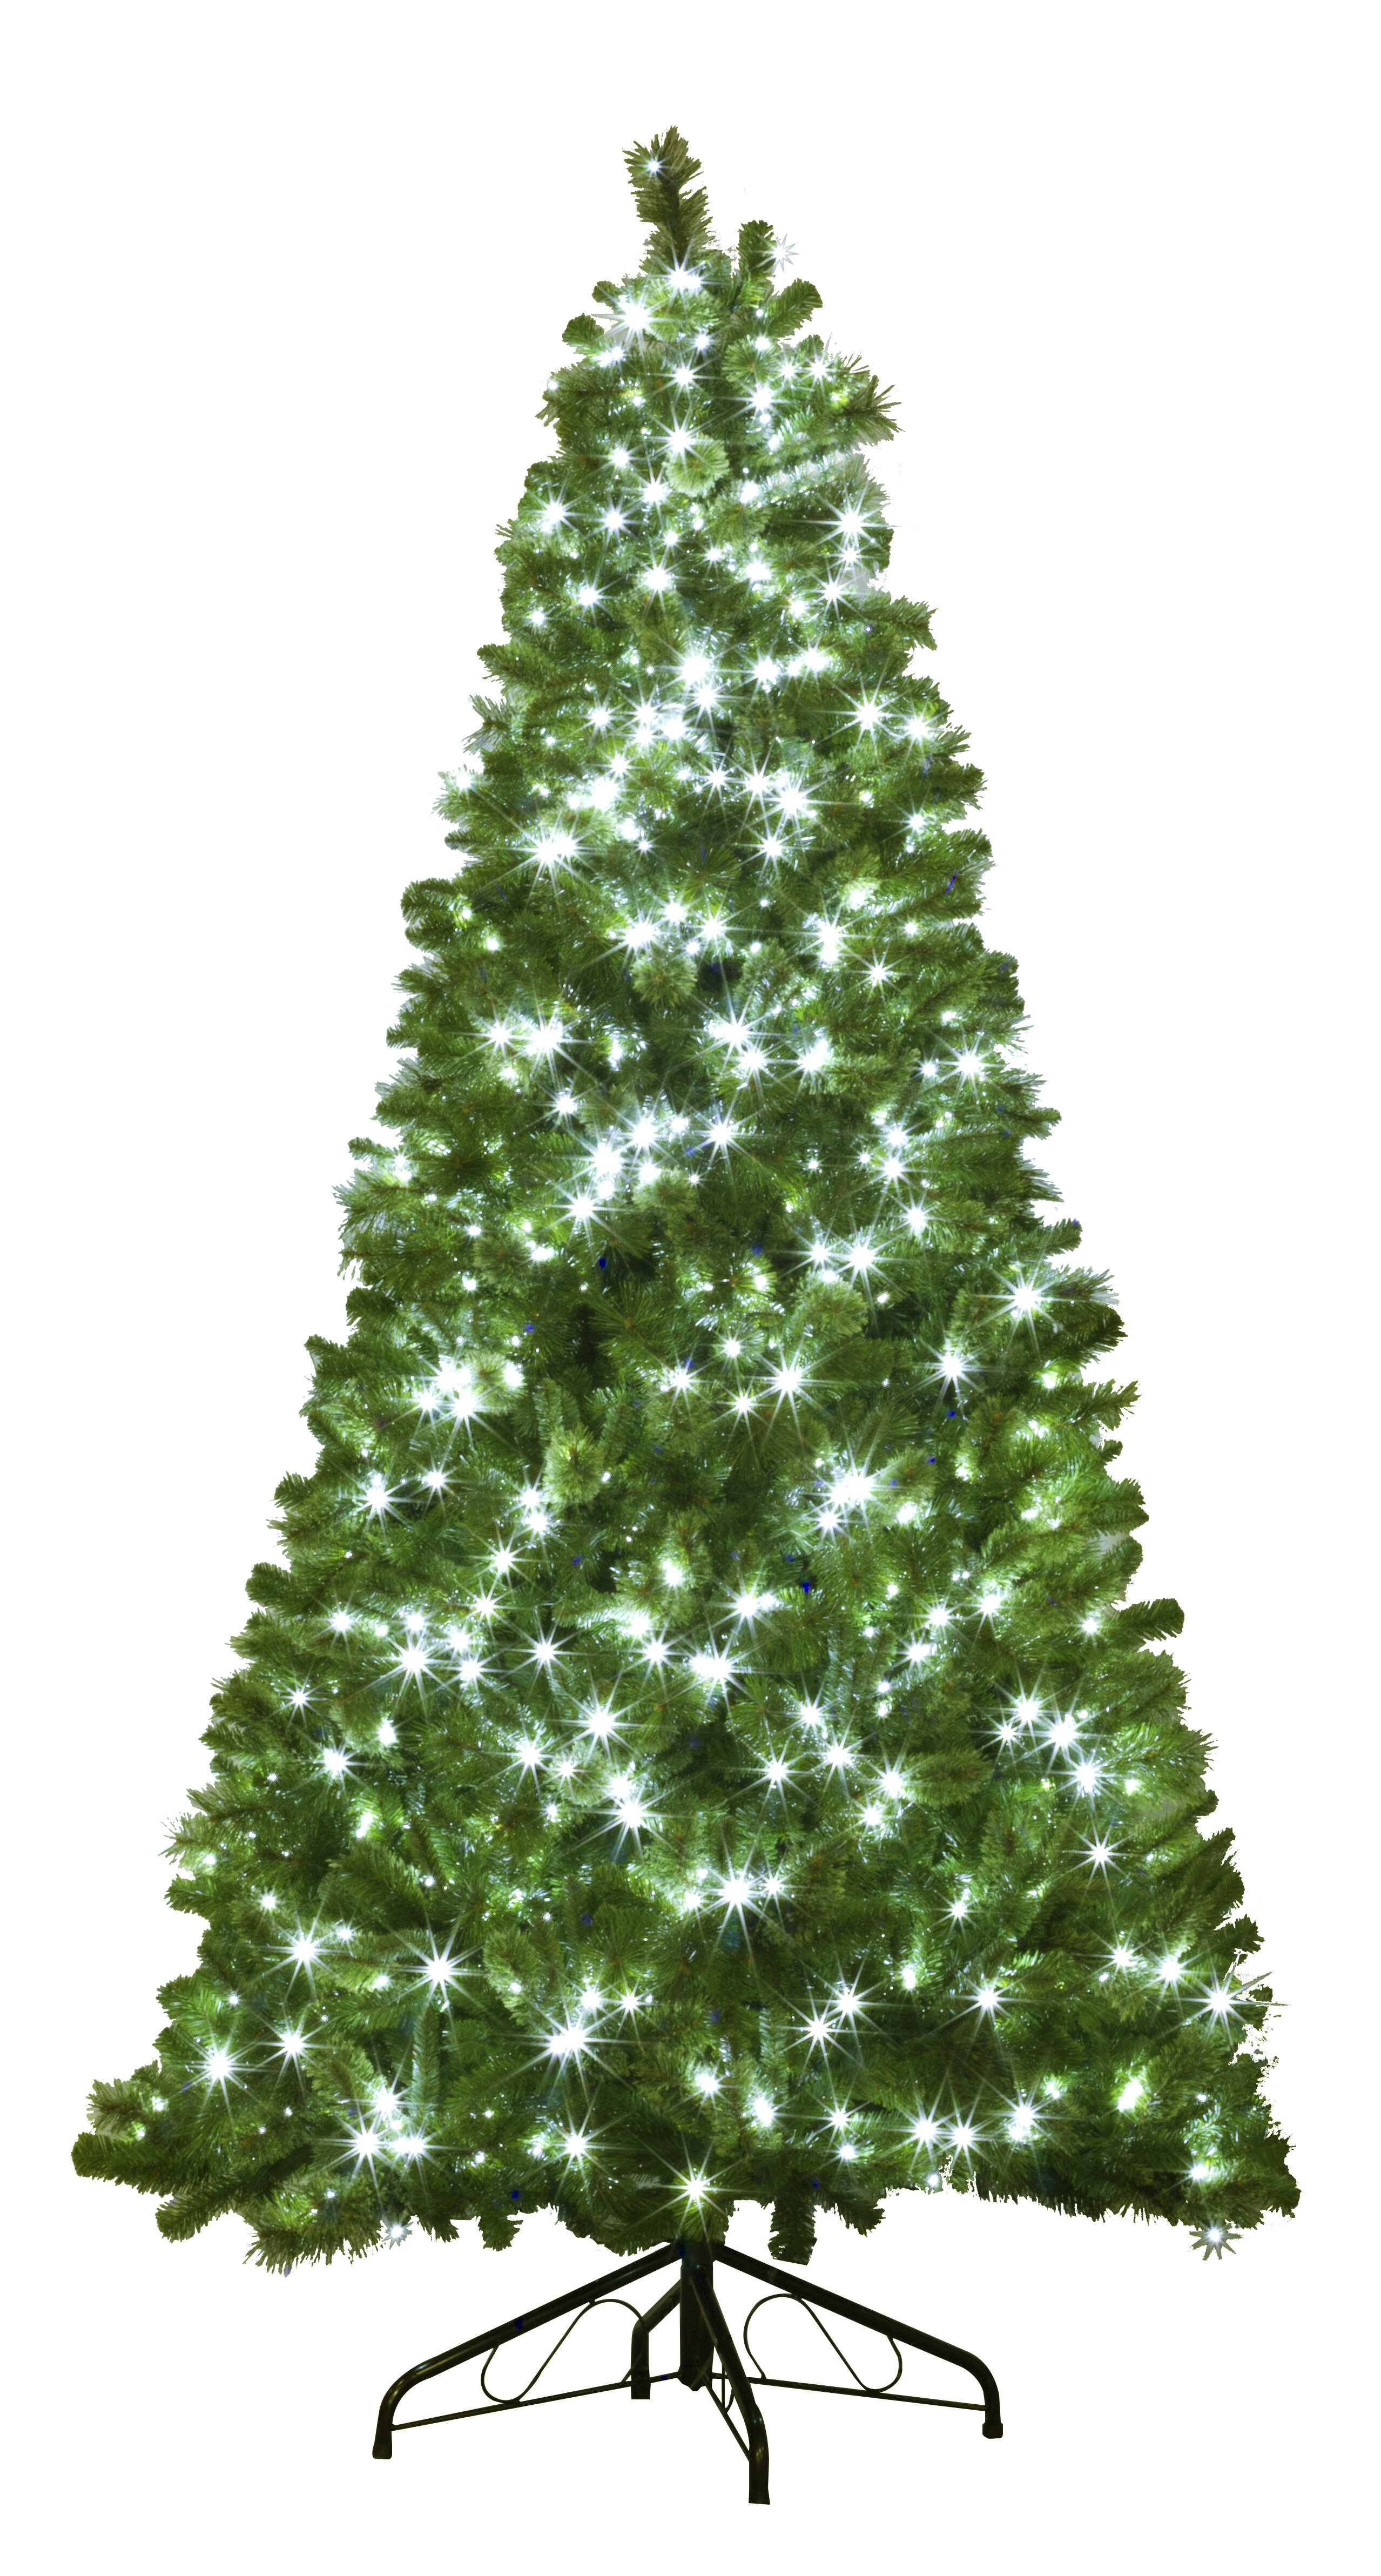 Pre-Lit Pop-Up Christmas Tree Plug-in LED Warmwhite 210cm (32 functions)  UT-050-7 green